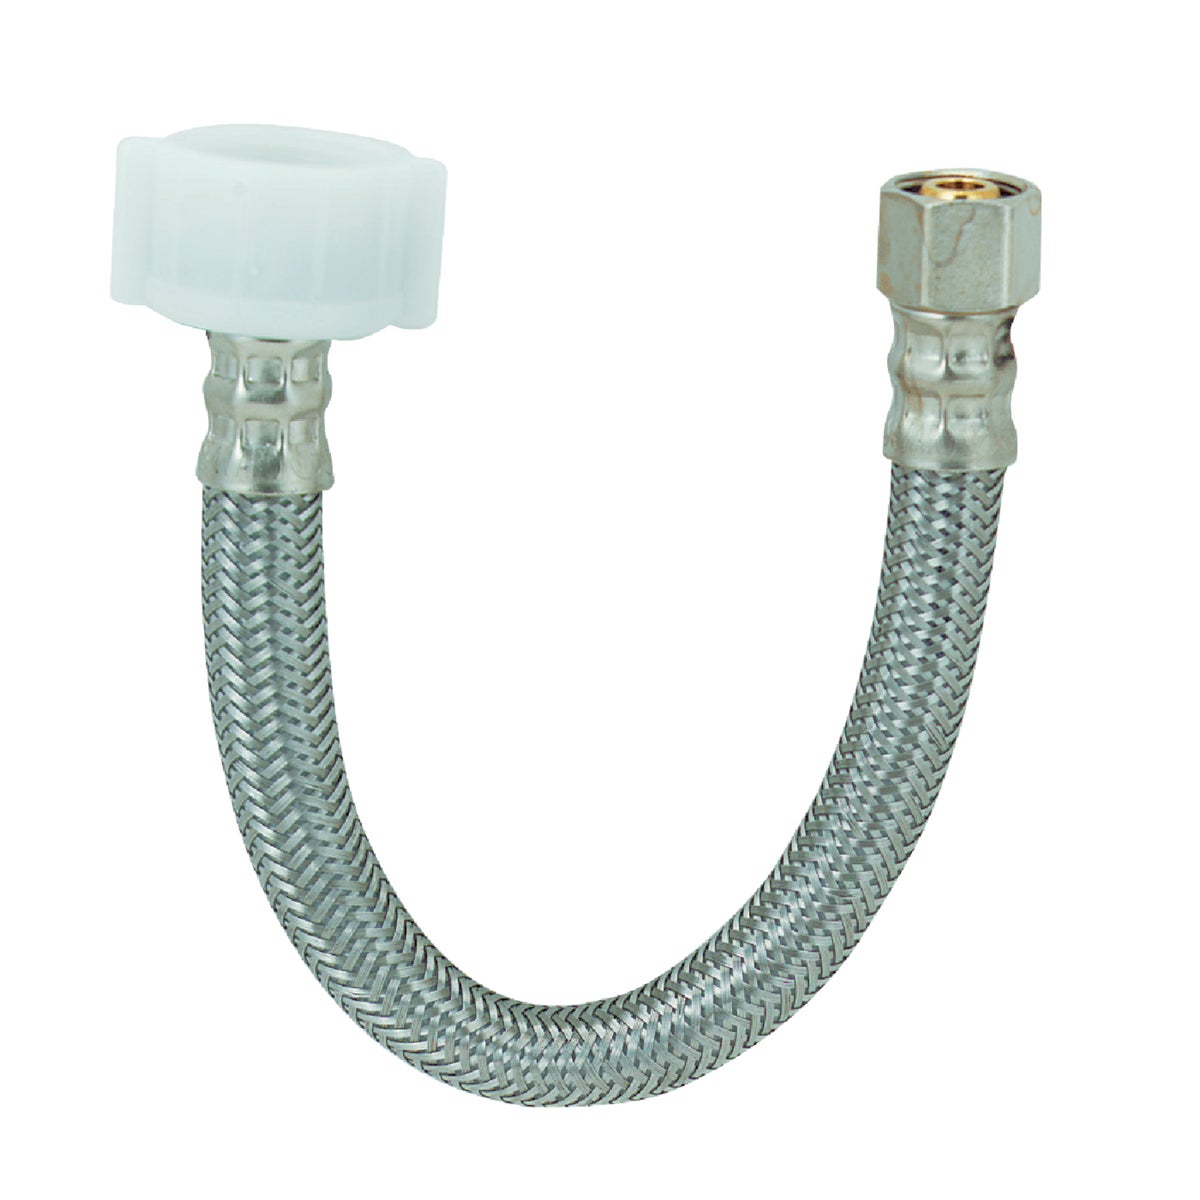 Item 404764, Braided stainless steel wrapped around reinforced braided PVC with brass 